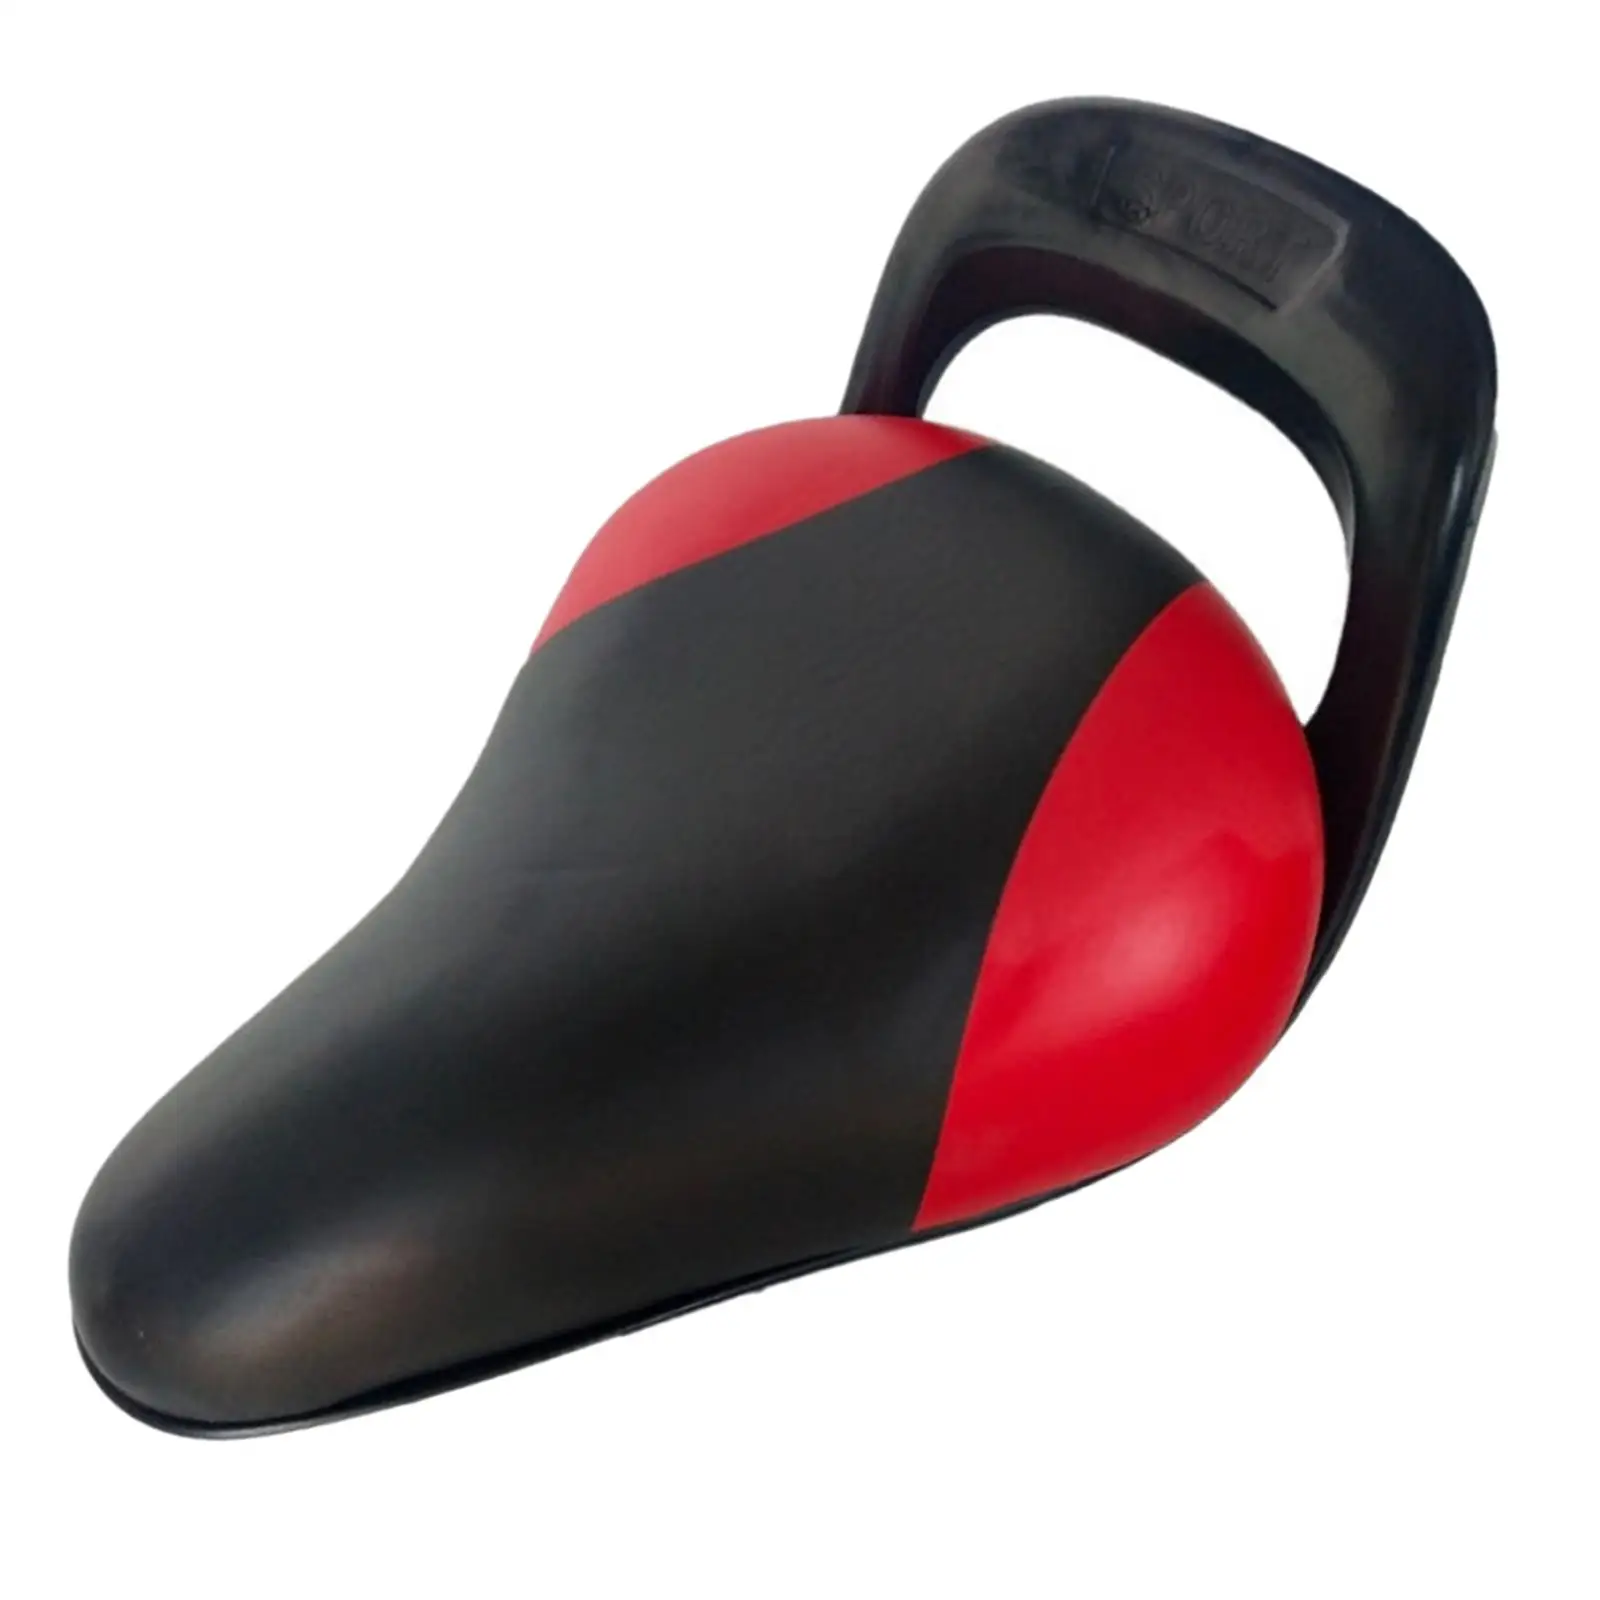 Waterproof Kids Bike Saddle with Handle Child for Boys and Girls Bicycle